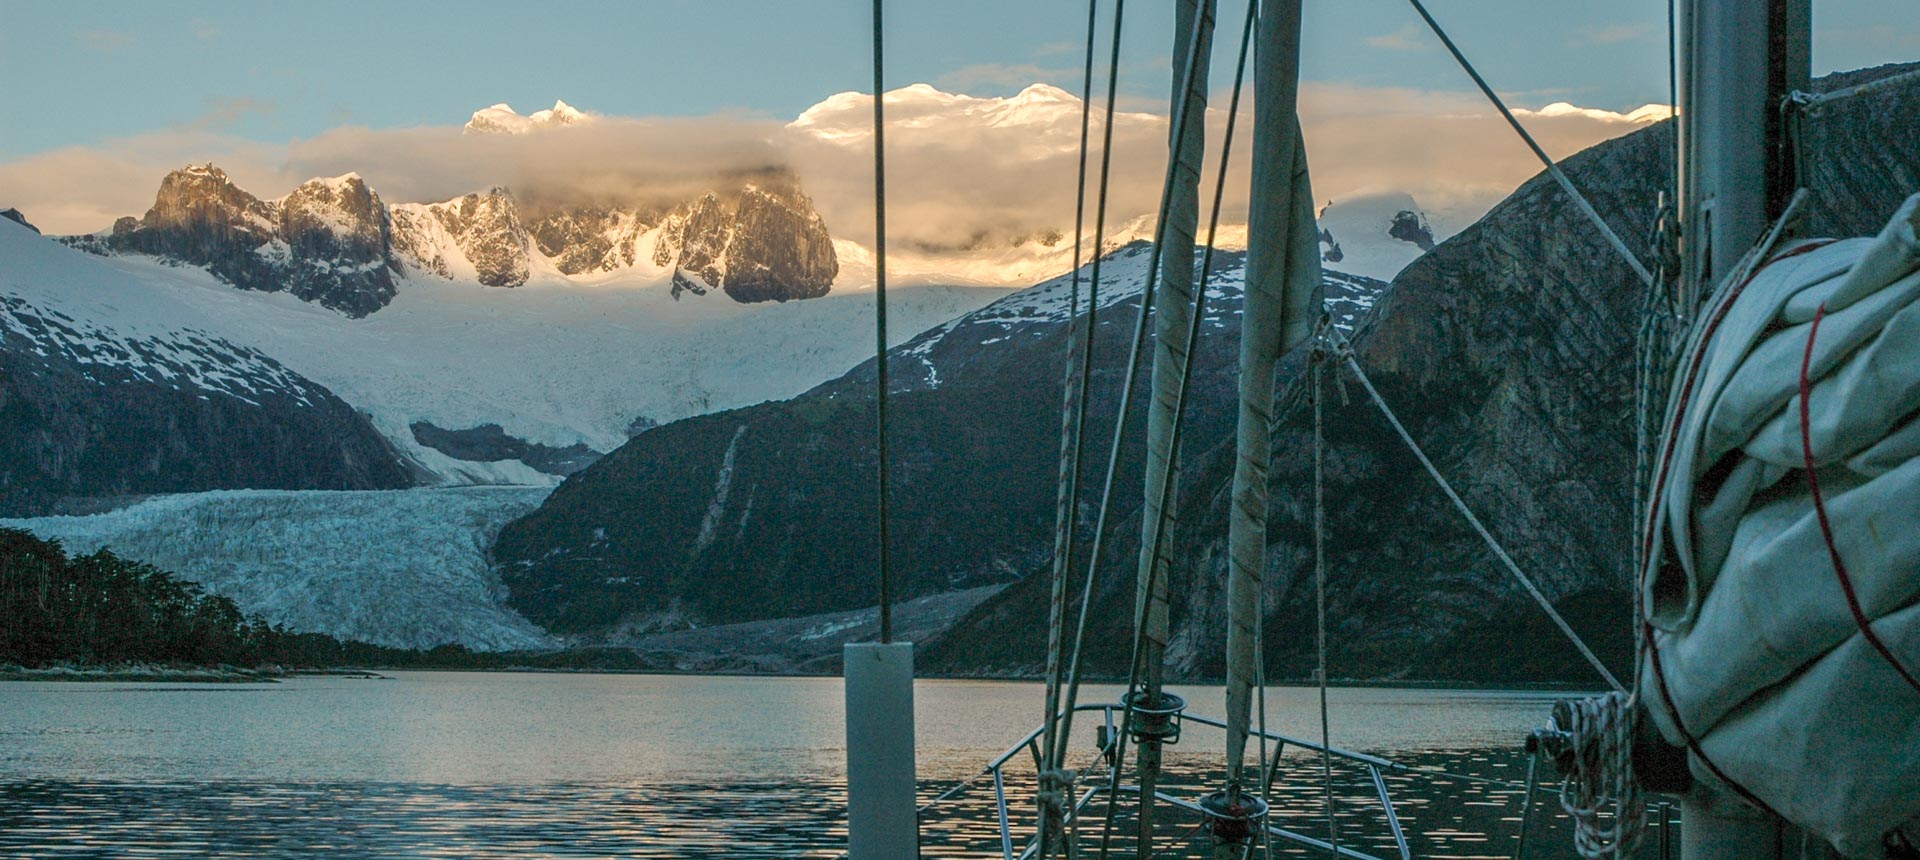 Expedition Yacht Seal sailing in Tierra del Fuego and Cape Horn